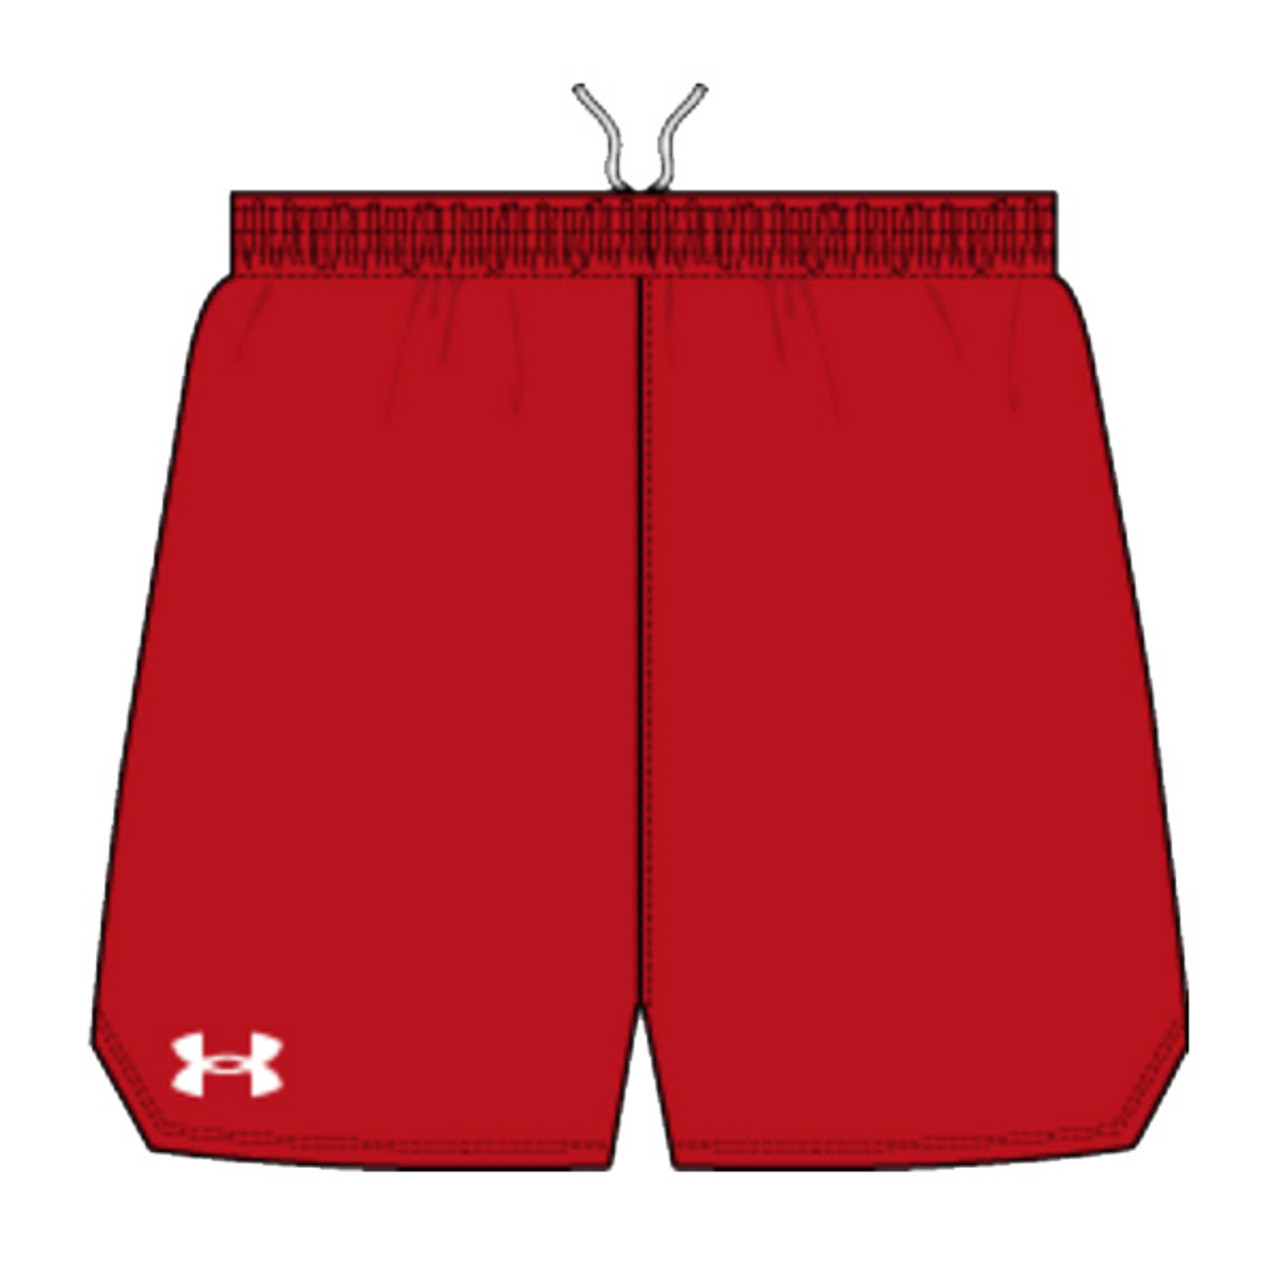 Under Armour Shorts  Available at DICK'S